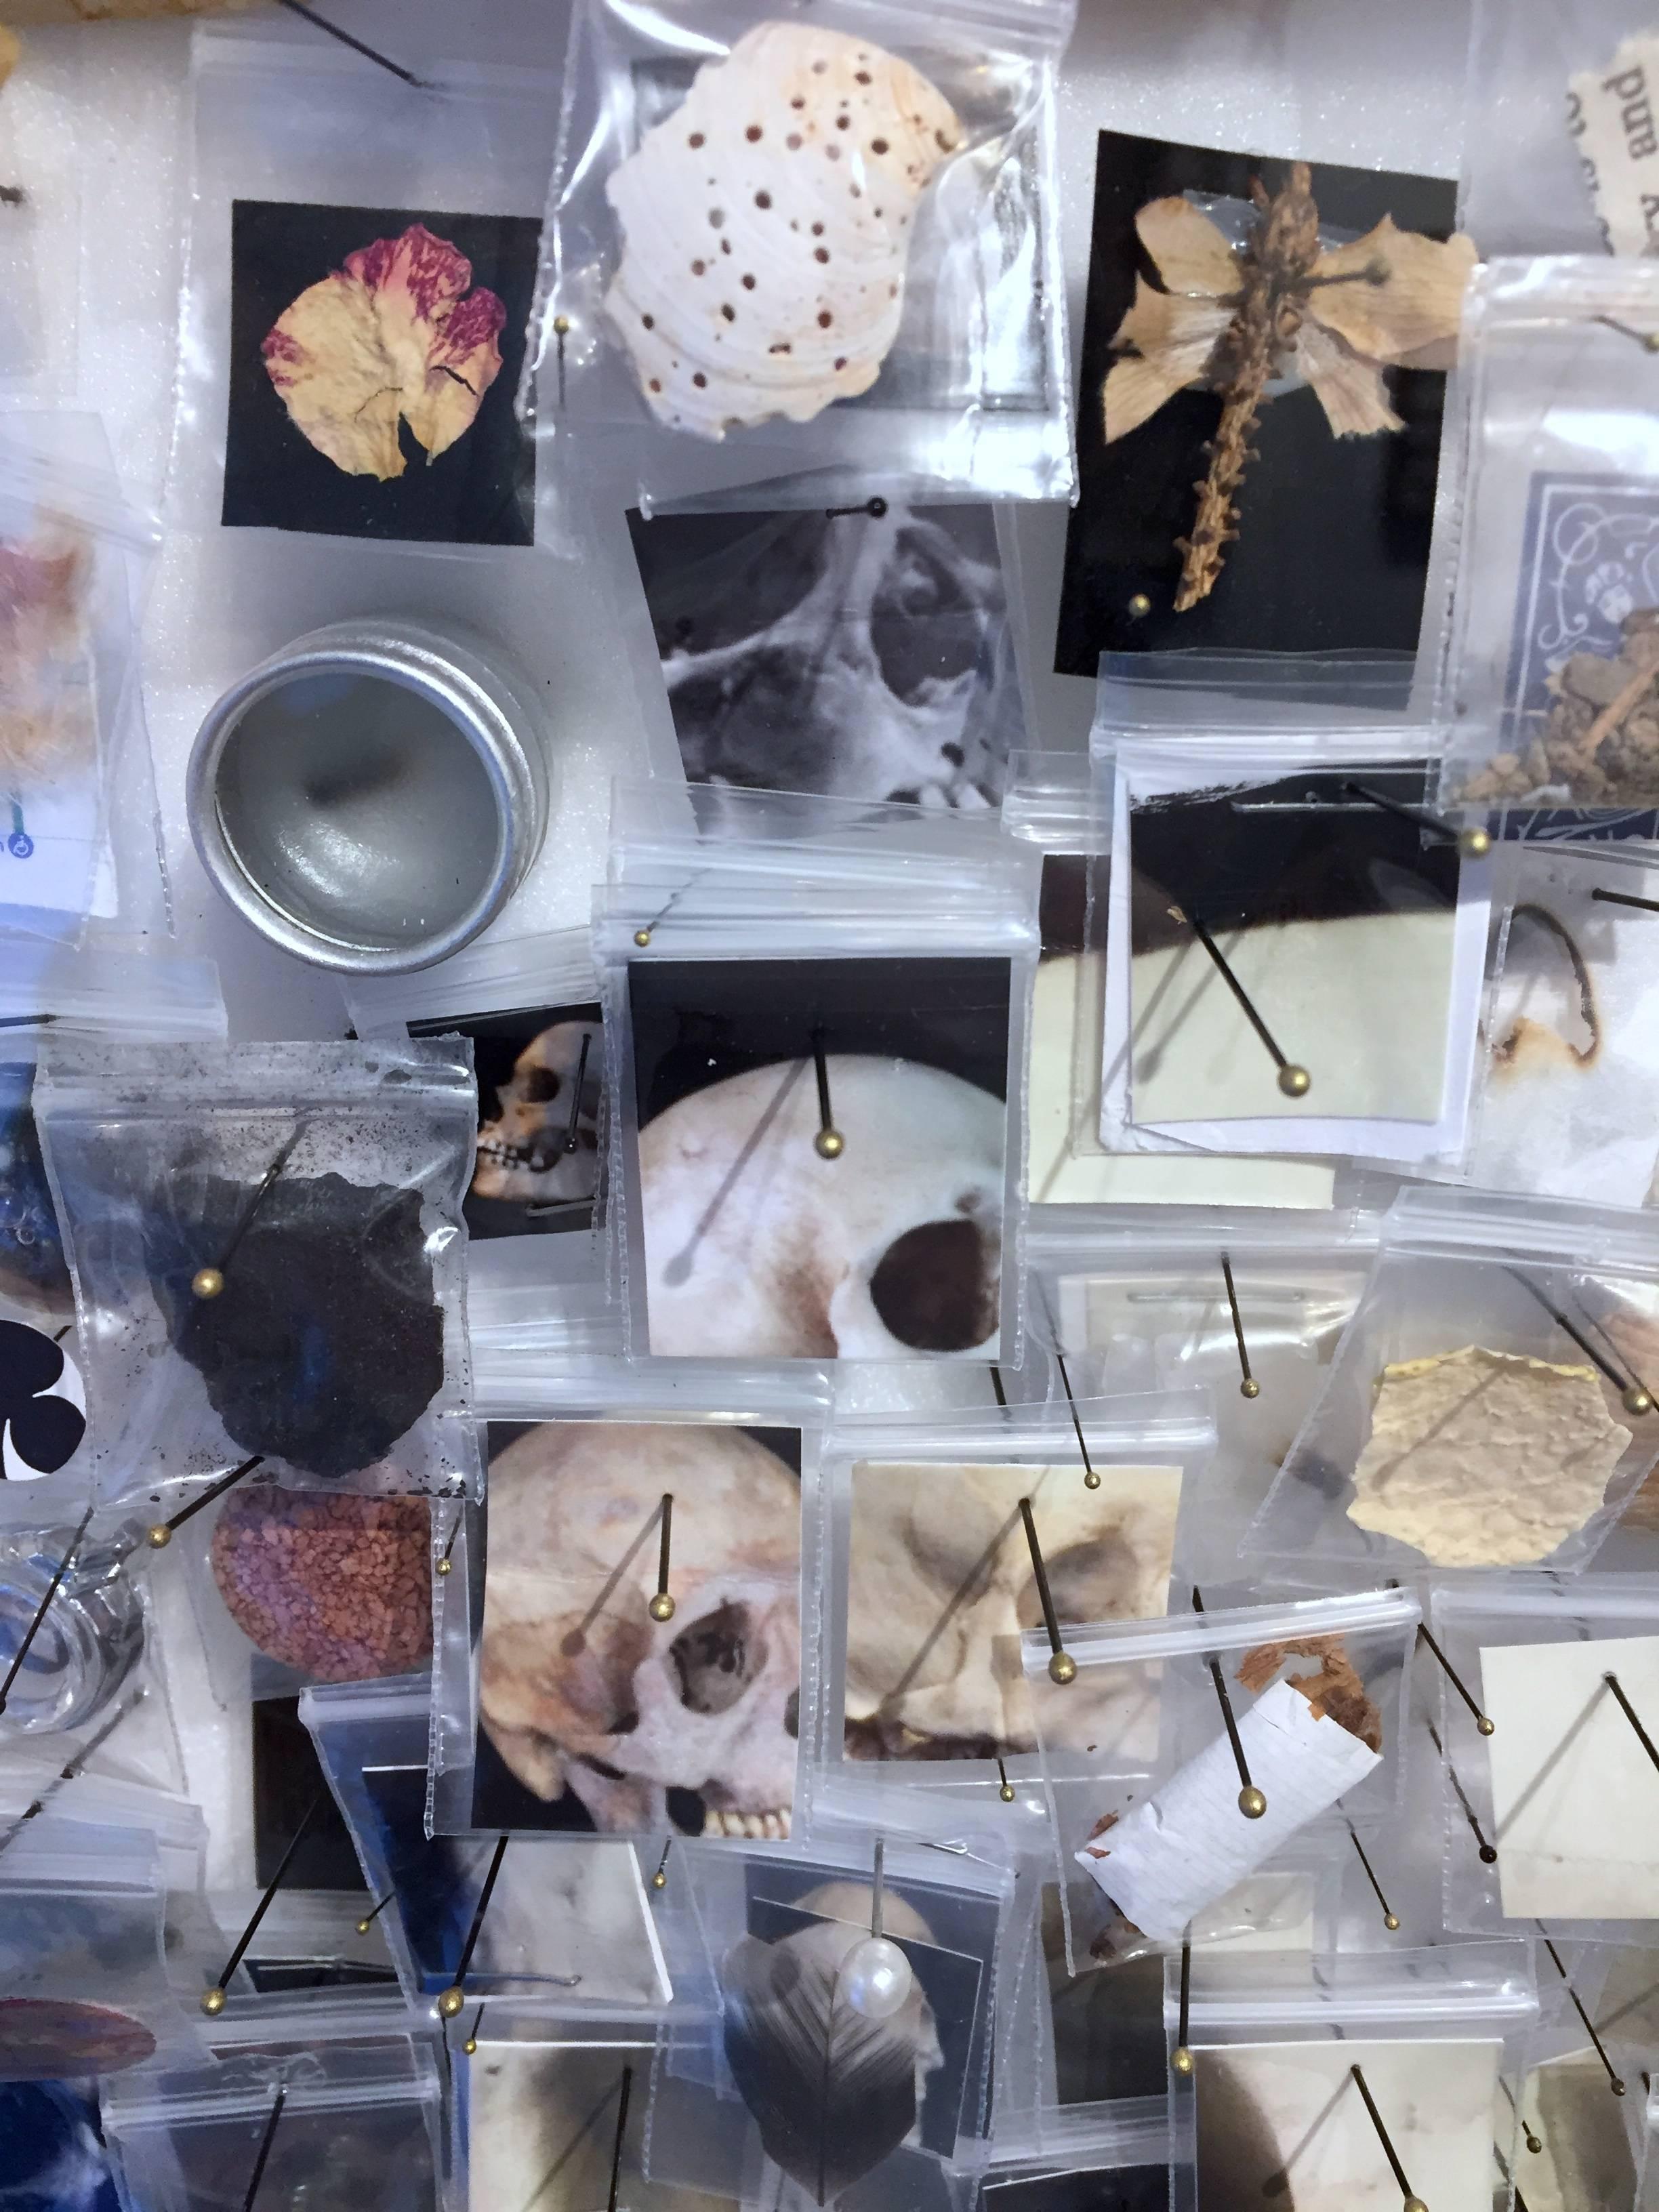 Specimen v 12 - archival prints, insect pins, plastic bags, thumbtacks, wood, cardstock, botanical material, shells, wax, tobacco, bones, dirt, saw dust, feathers, sand, resin, playing cards, cork, matches, mirrors.

The NY artist examines new